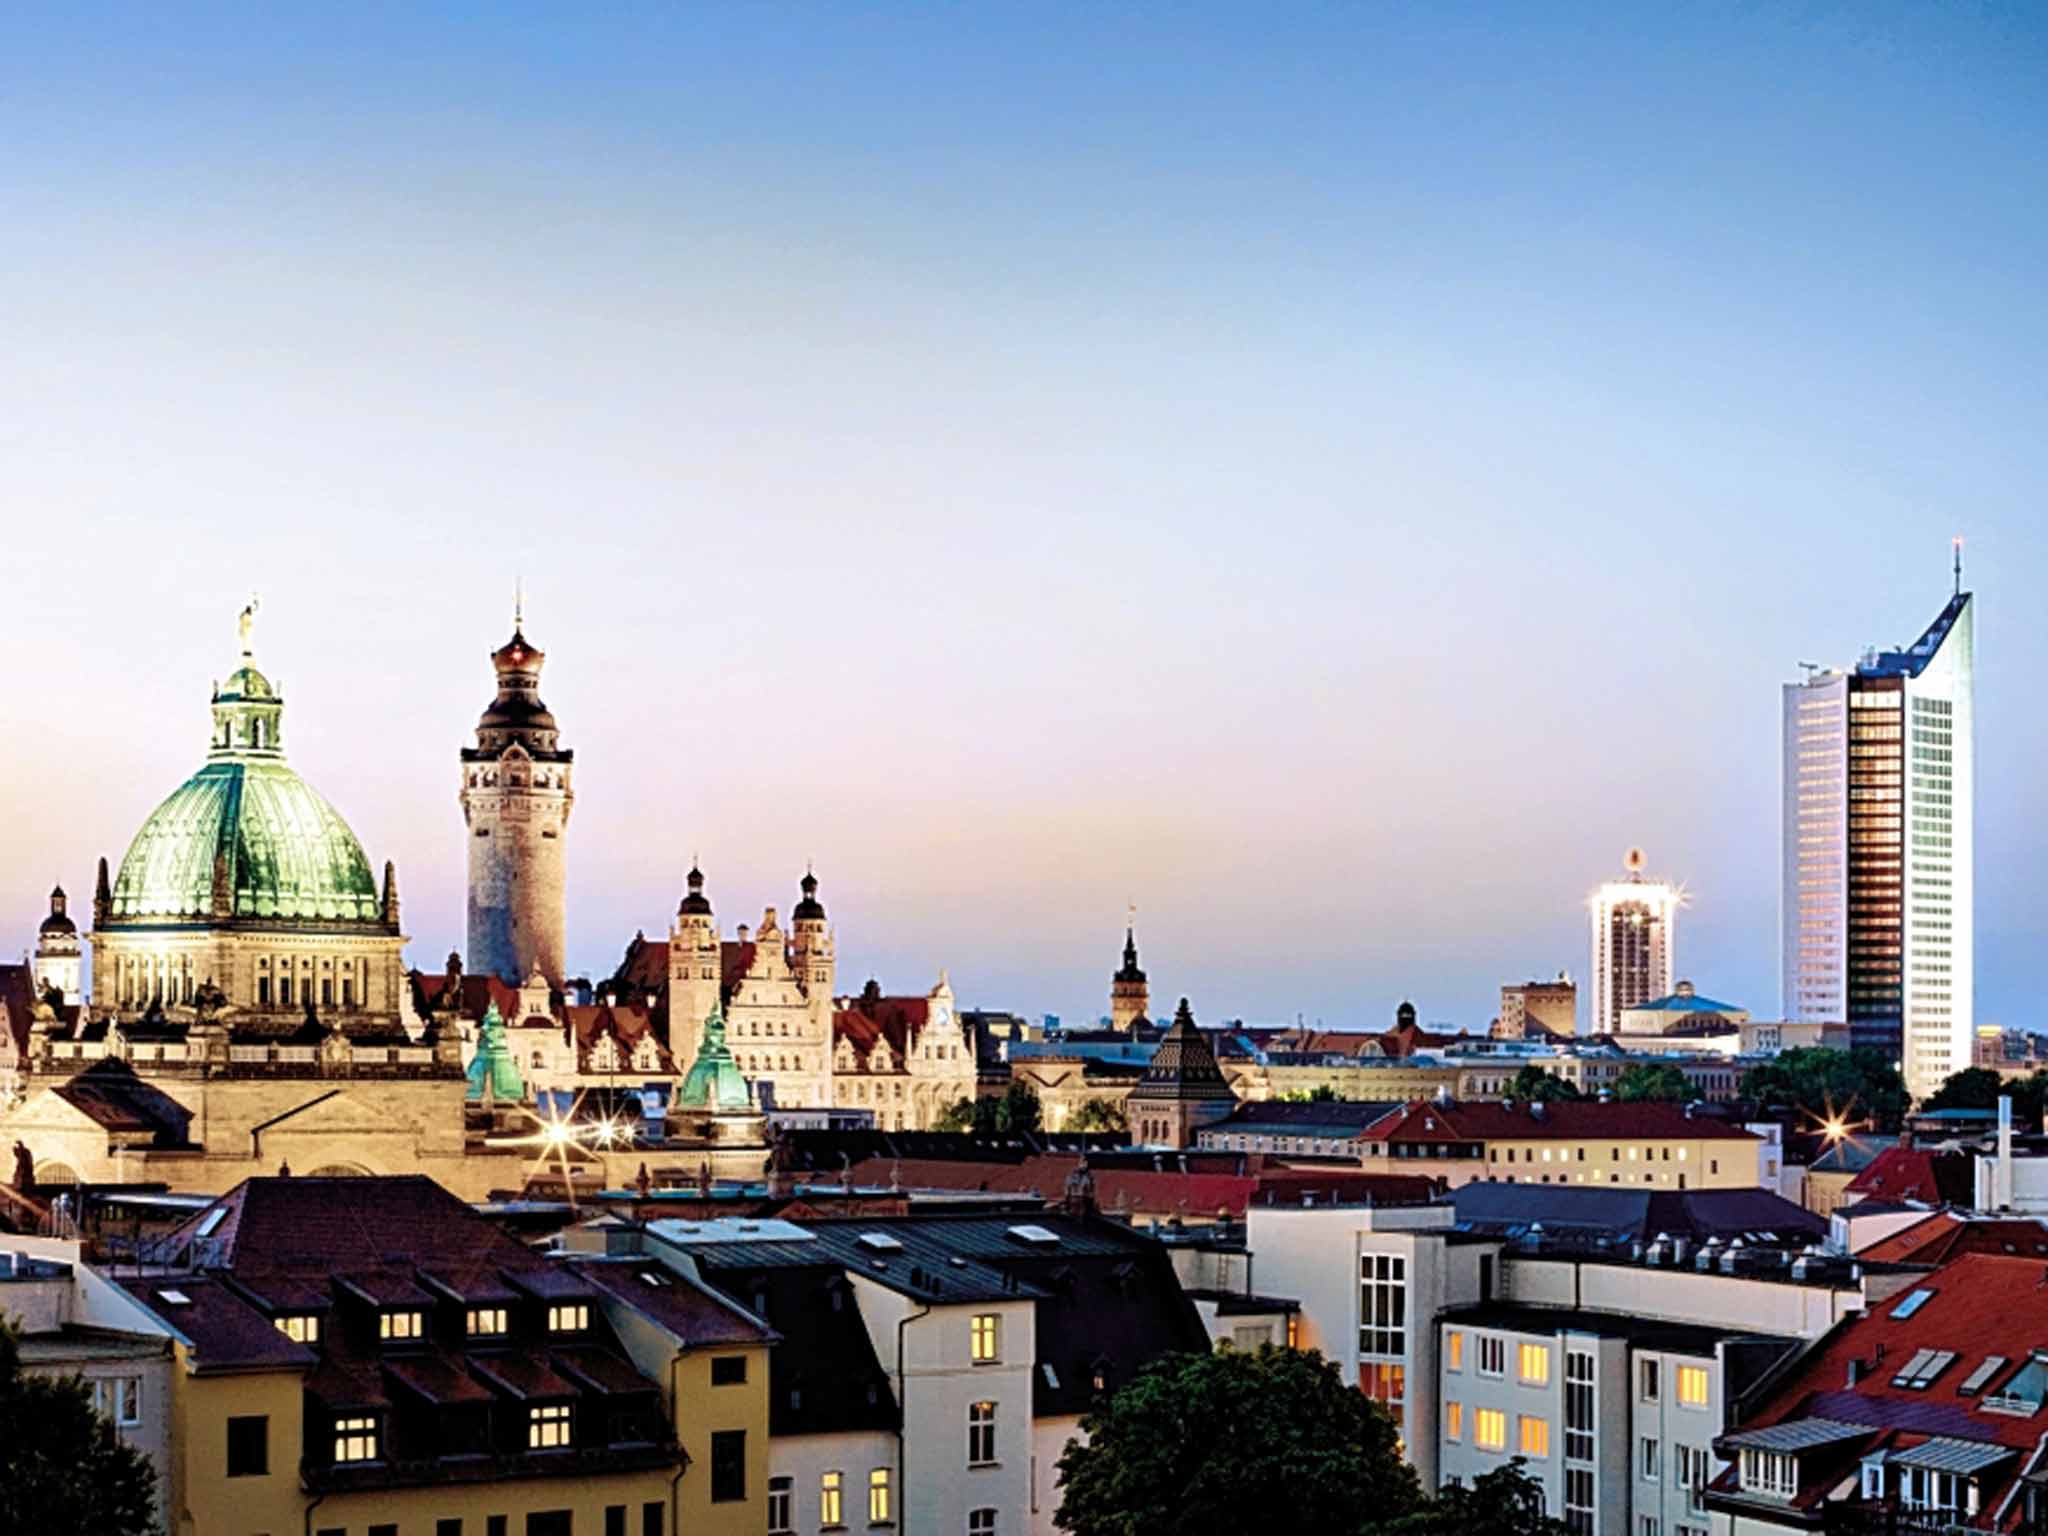 Leipzig travel tips: Where to go and what to see in 48 hours | The Independent